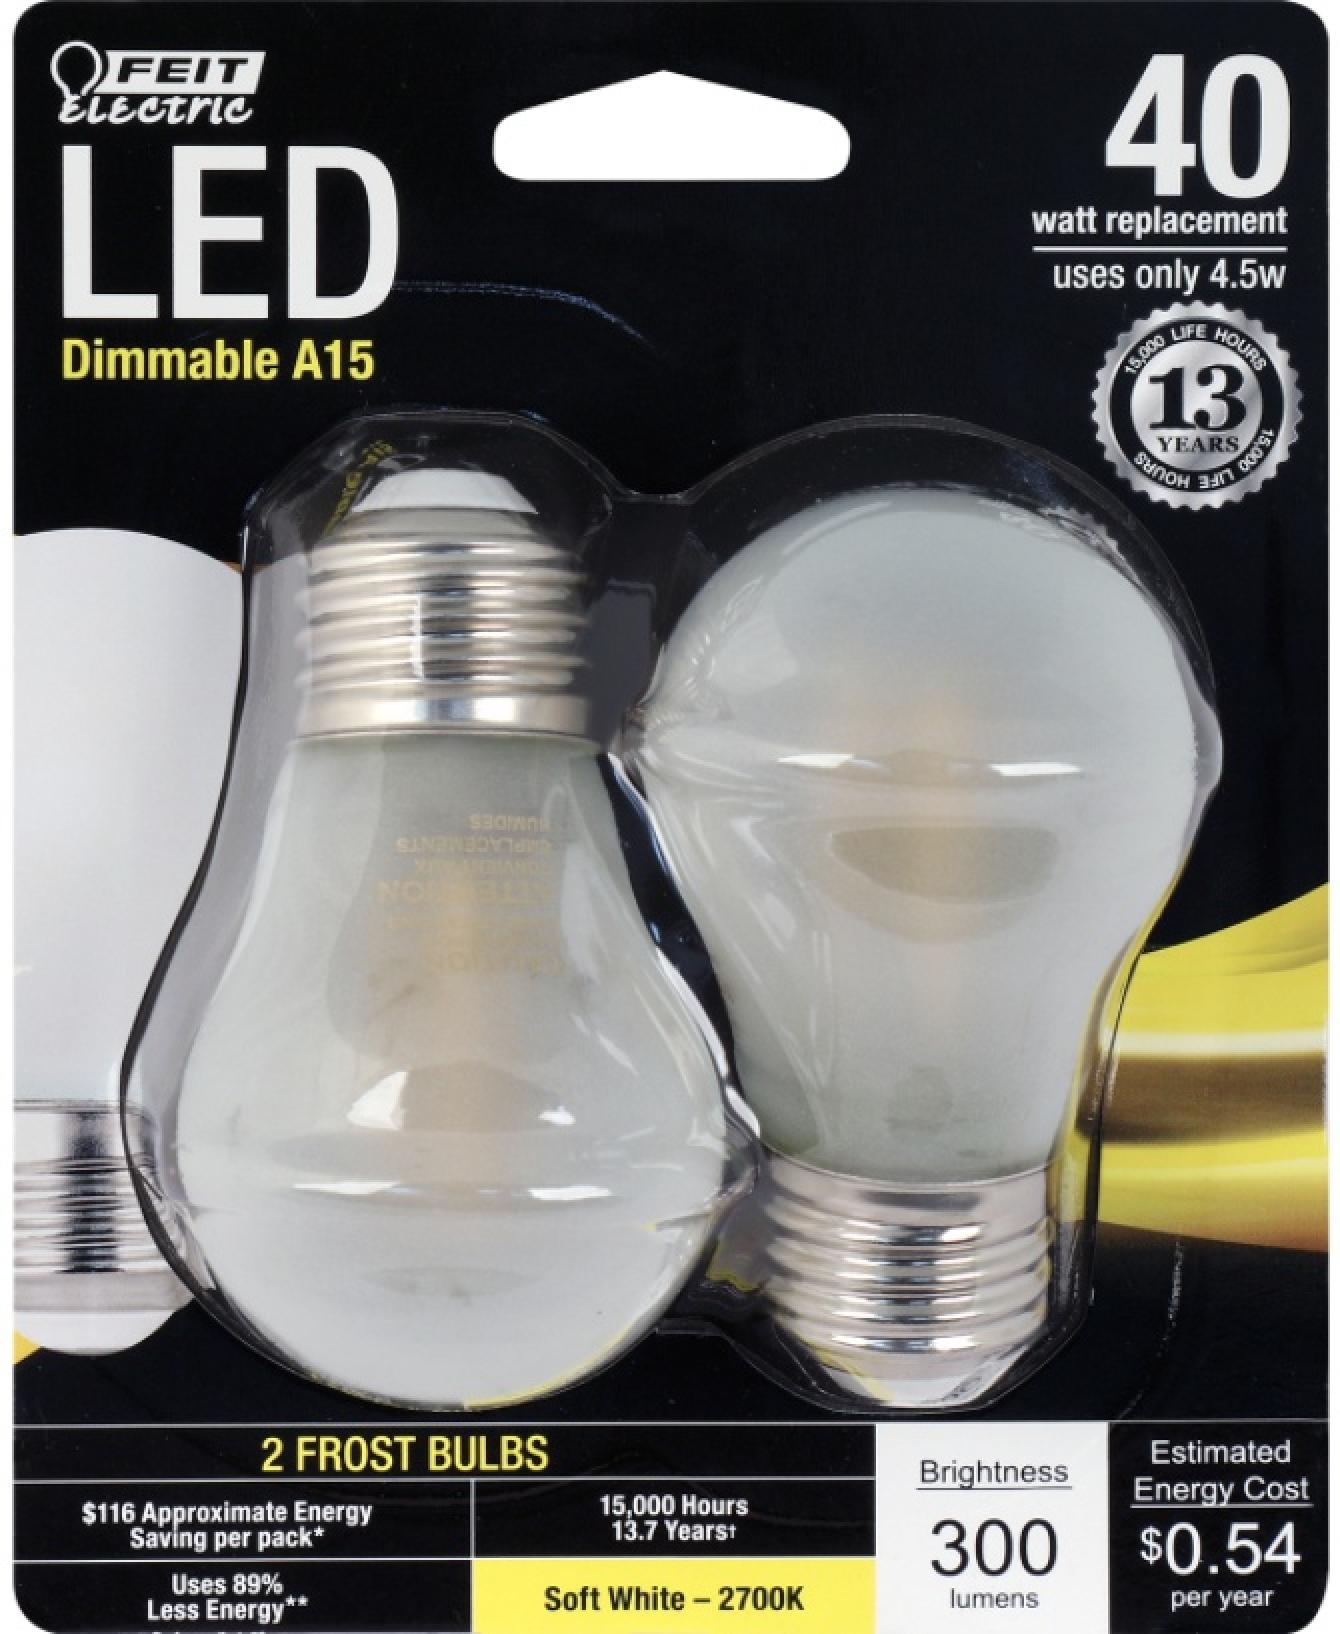 Feit Electric LED 40 Watt Equivalent 300 Lumen Frosted Dimmable Light Bulb (2 Pack)